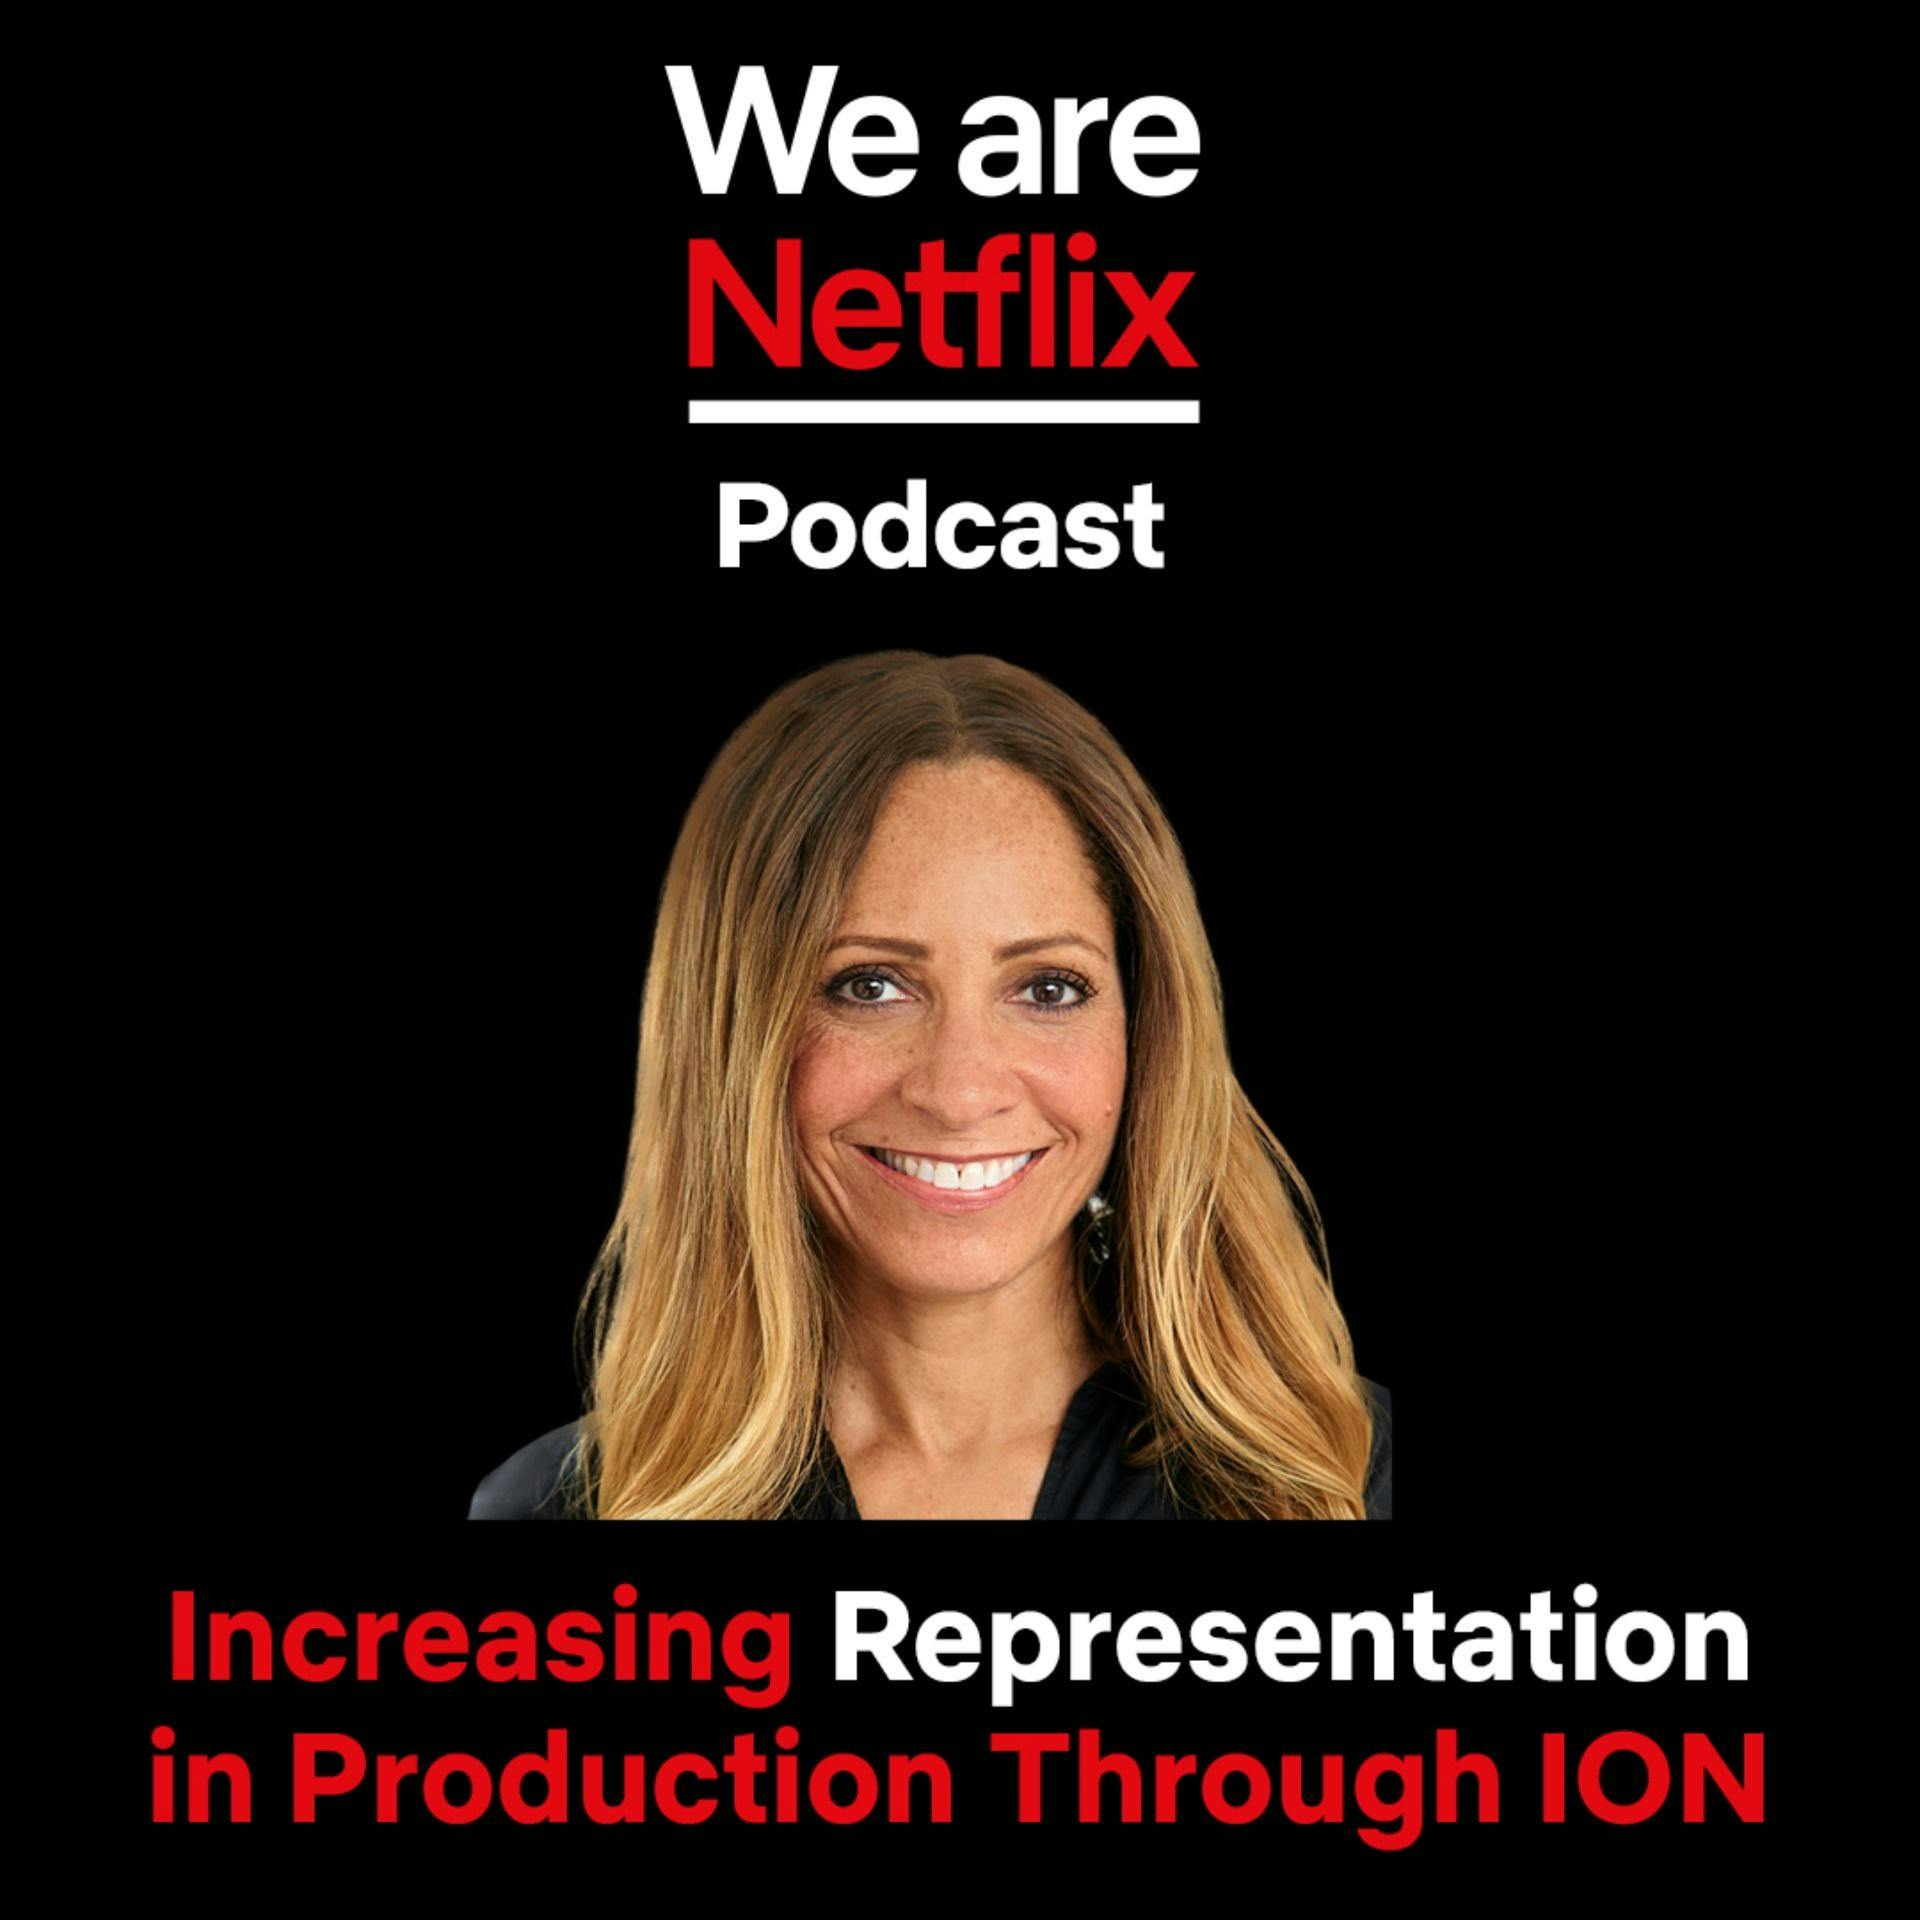 Increasing Representation in Production Through ION